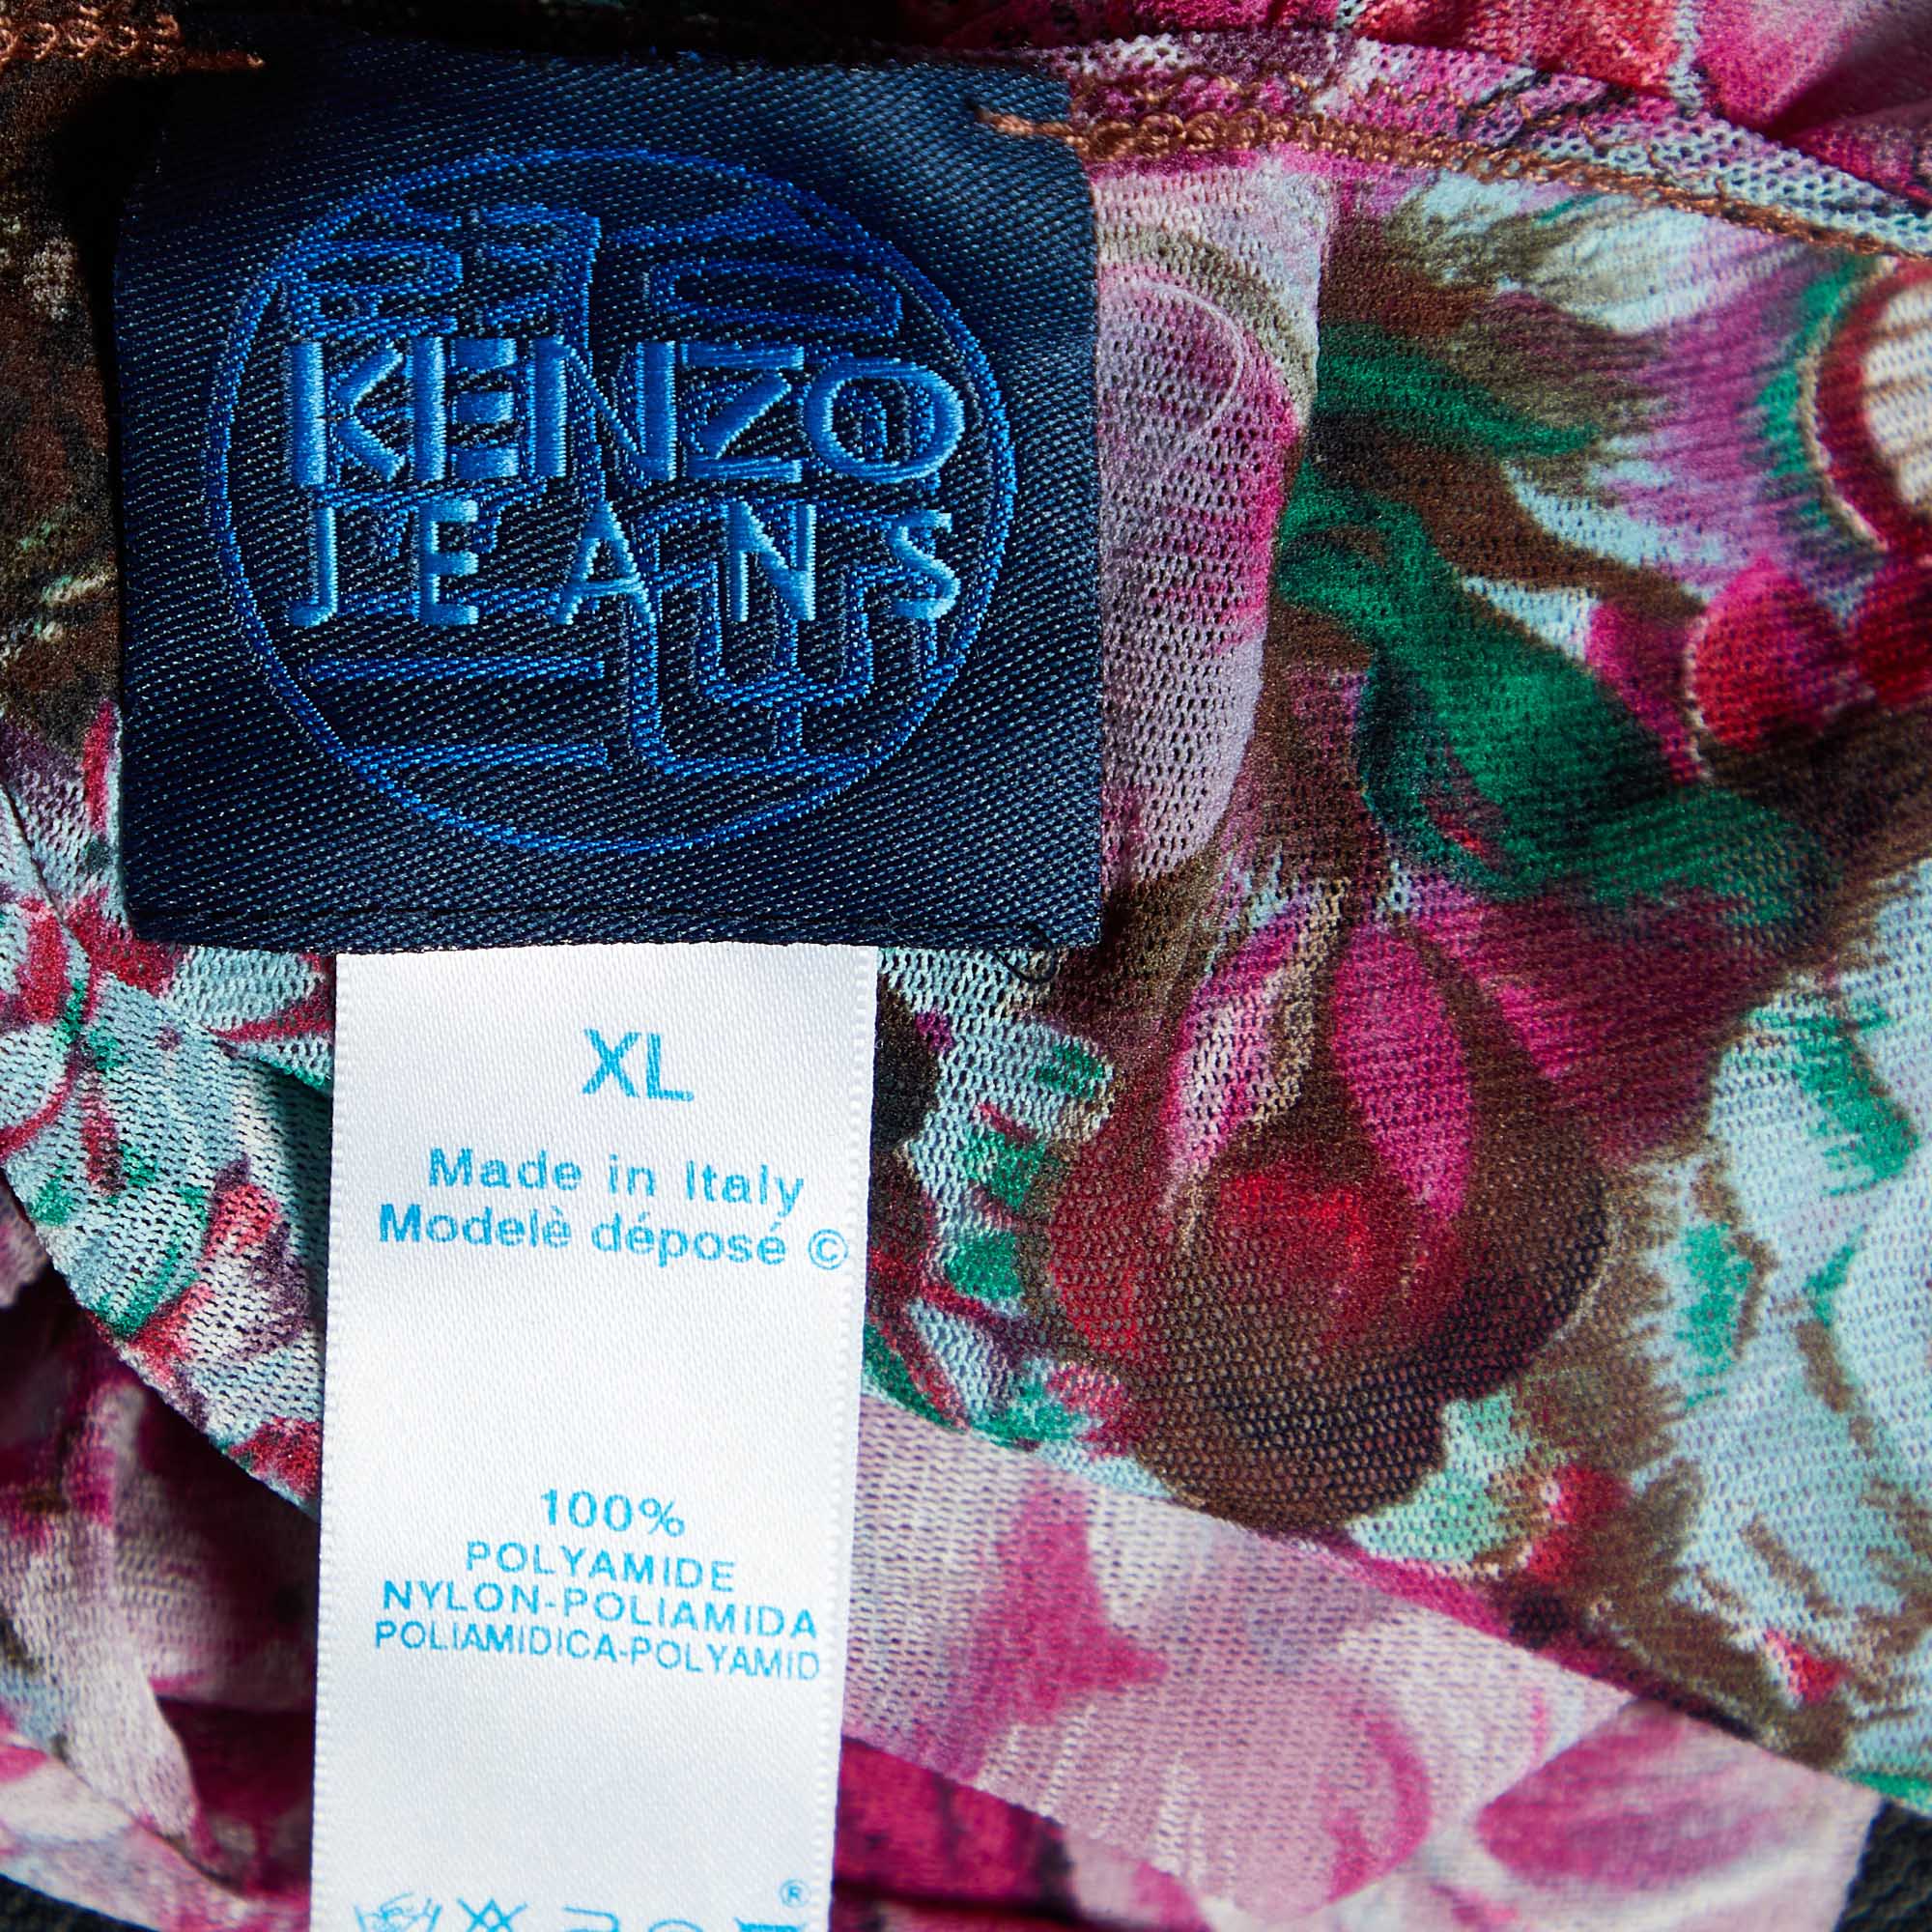 Kenzo Jeans Pink Floral Print Knit Ruffled Neck Top XL